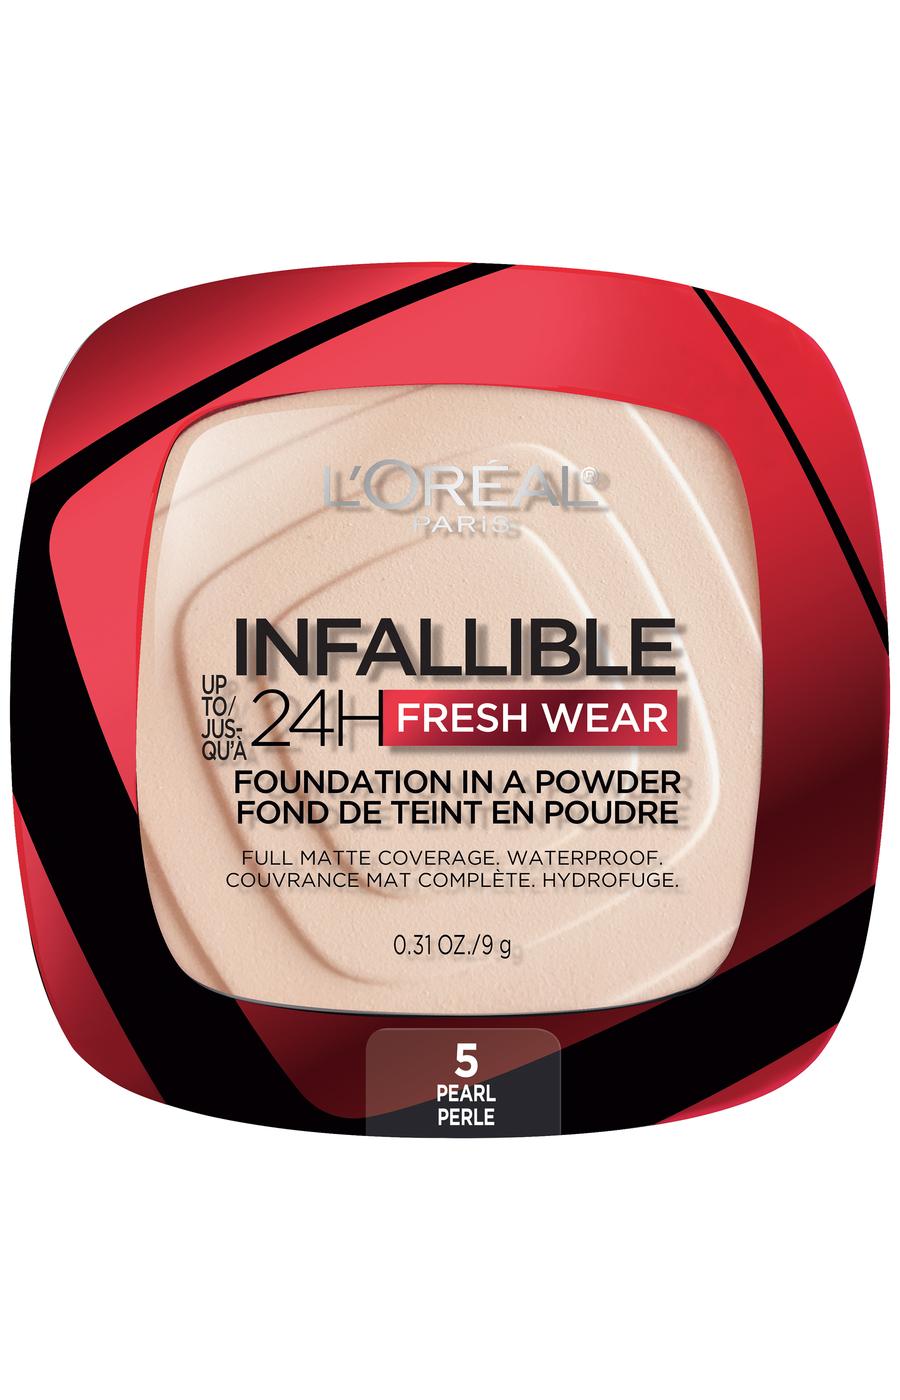 L'Oréal Paris Infallible Up to 24H Fresh Wear Foundation in a Powder Pearl; image 1 of 4